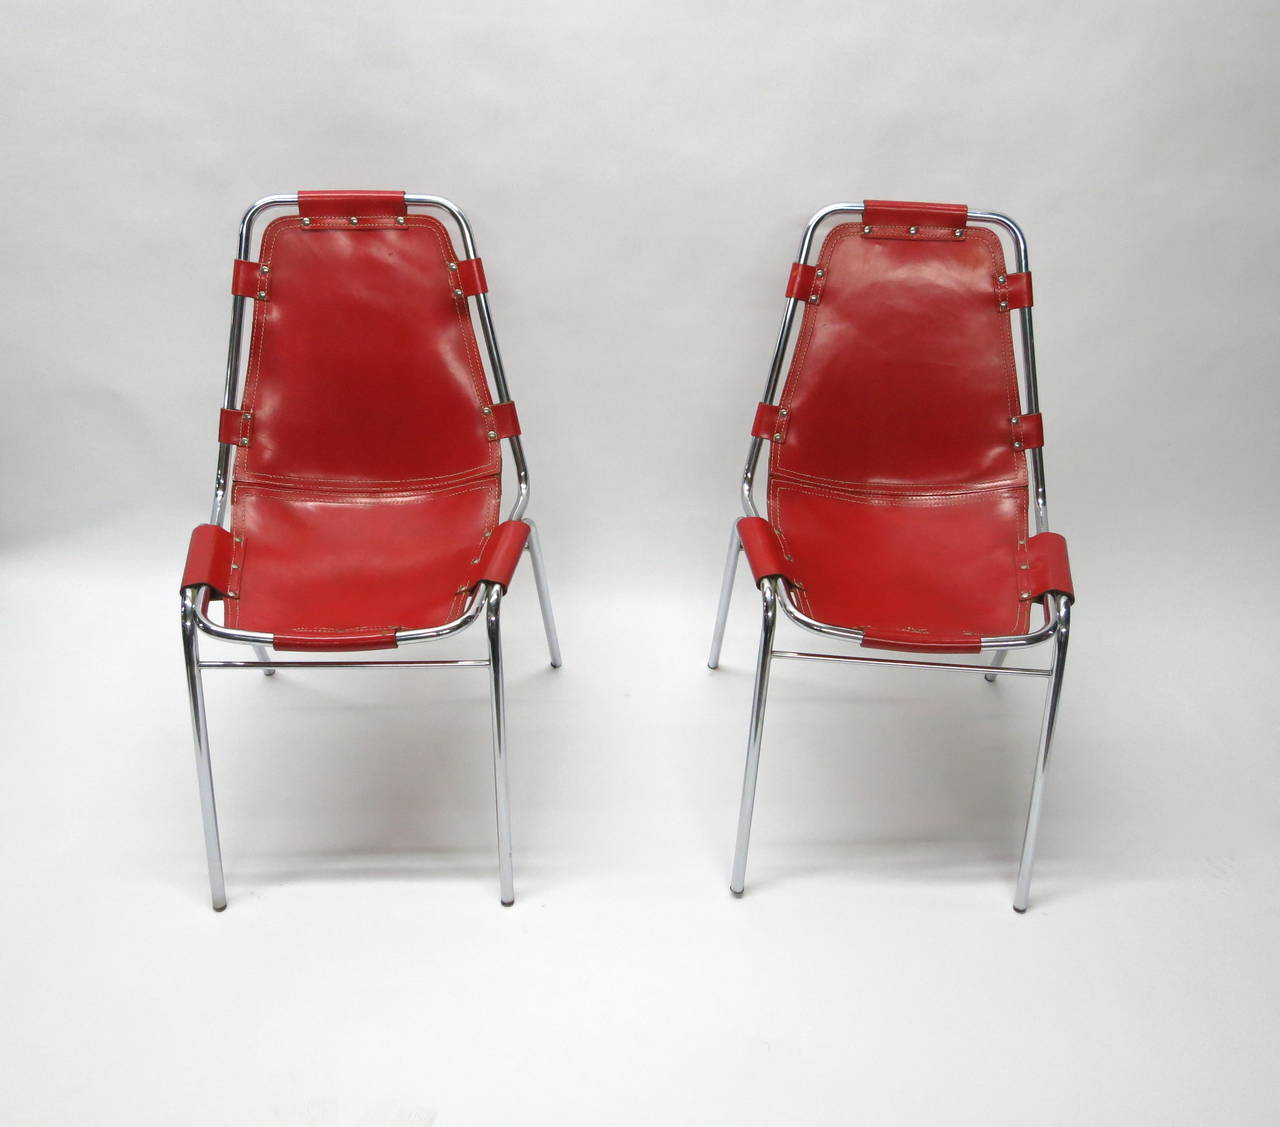 *SUMMER SALE*
Set of four stackable dining chairs in original red leather. The seat and back are stitched together and riveted to the chrome frame. The chairs are in the original condition with normal wear to the leather and very few missing